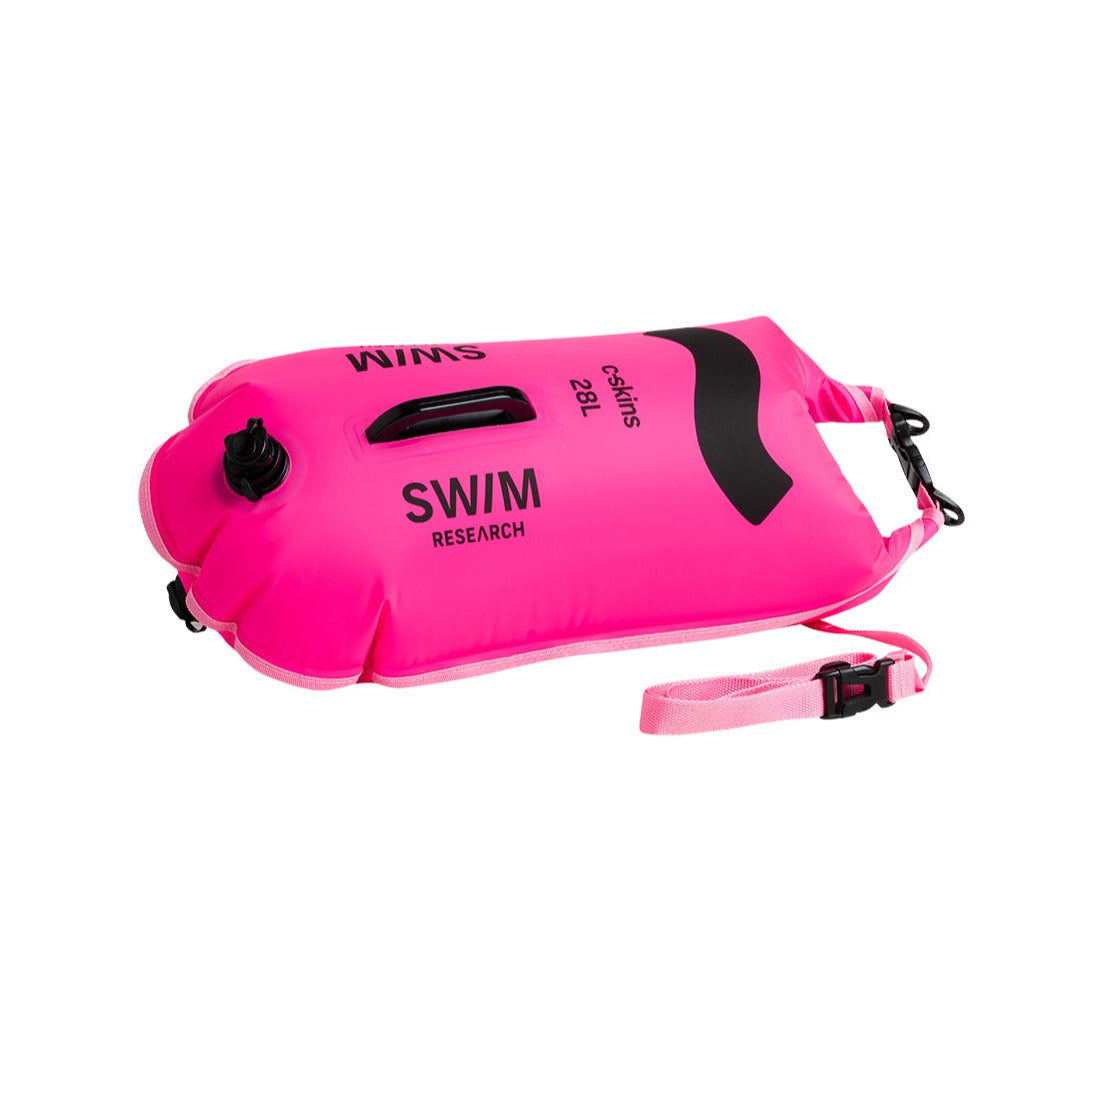 c-skins-swim-research-28-litre-dry-bag-float-wild-swimming-safety-pink-front-galway-ireland